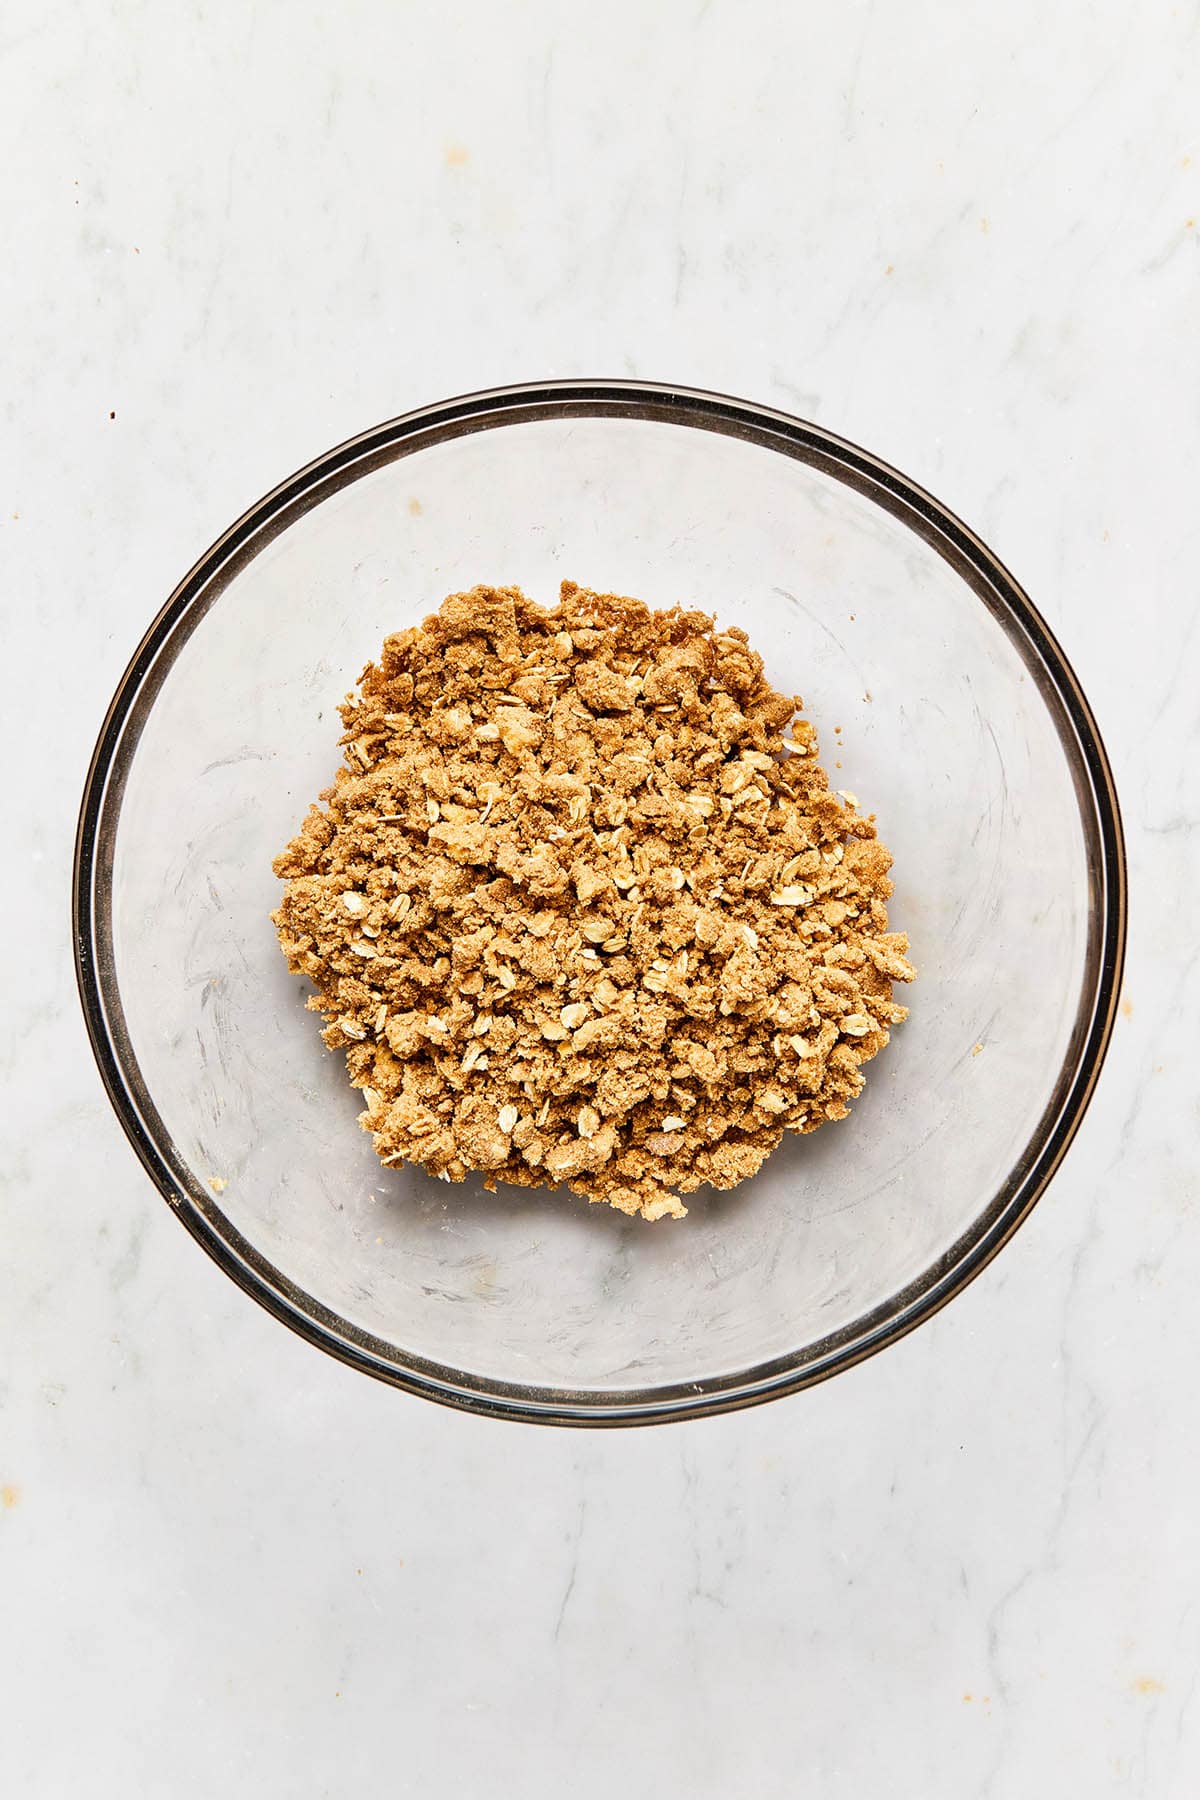 Mixed oat topping in a glass bowl.